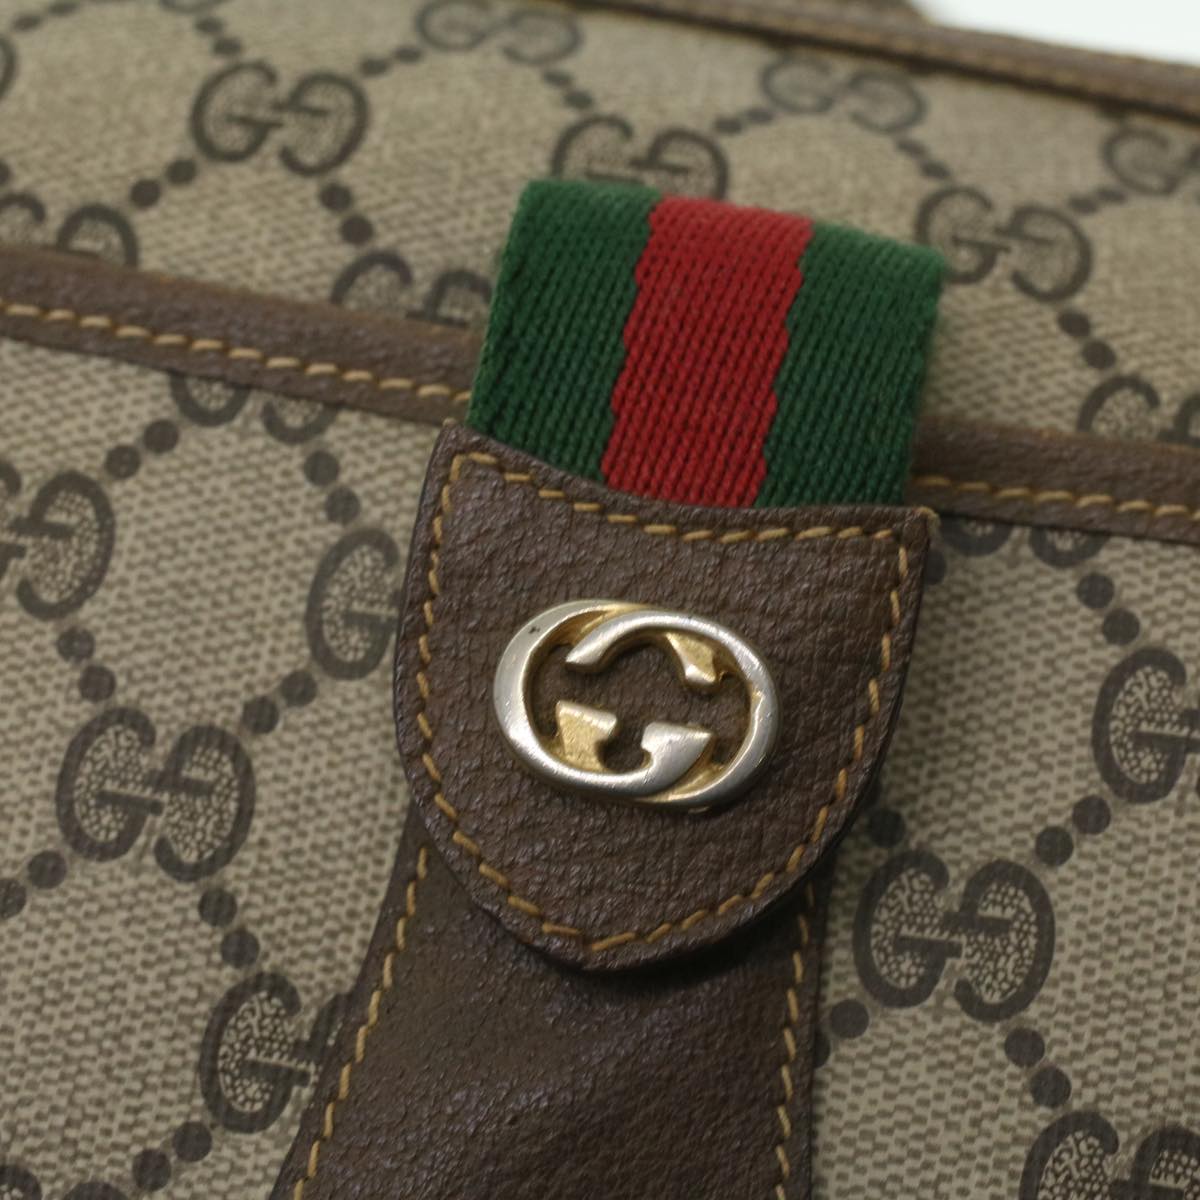 GUCCI GG Canvas Web Sherry Line Shoulder Bag Beige Red Green 8902032 Auth 37565